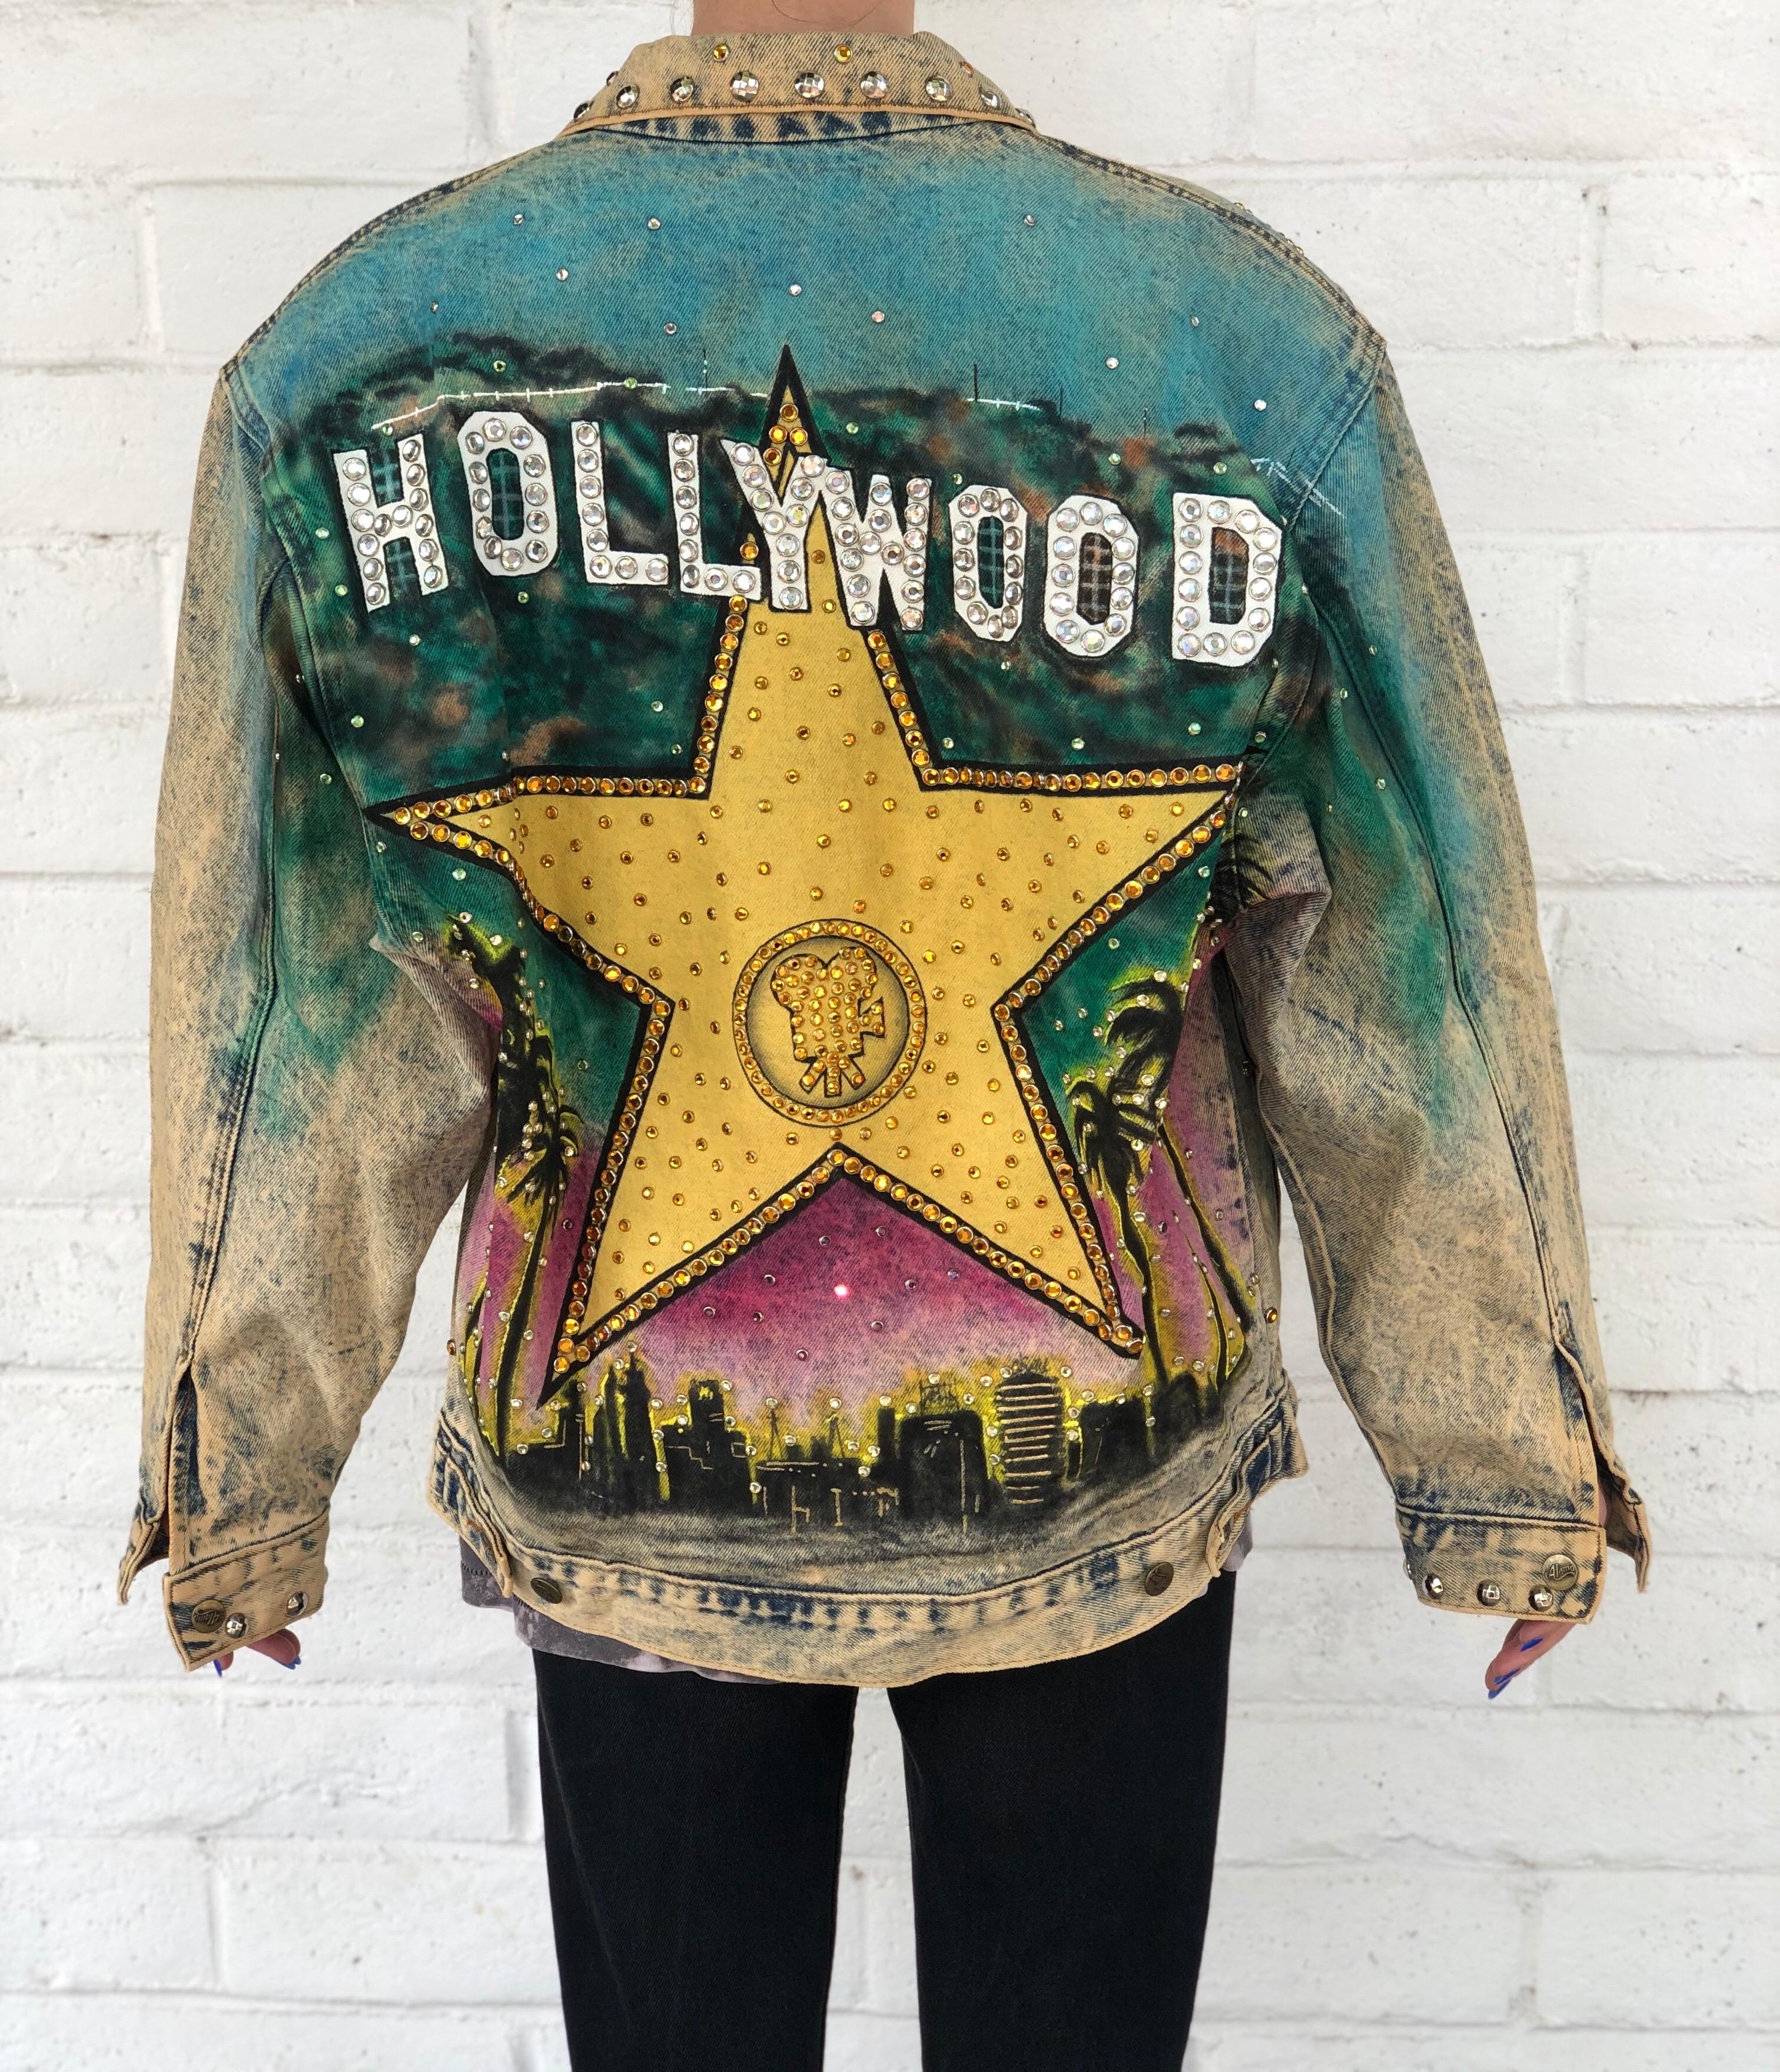 Feel like the ultimate Hollywood star with this Tony Alamo jean jacket! Circa 1987, this oversized jean jacket features an acid wash, brass toned buttons, two front pockets and eye-catching rhinestone embellishing throughout. The front of the jacket